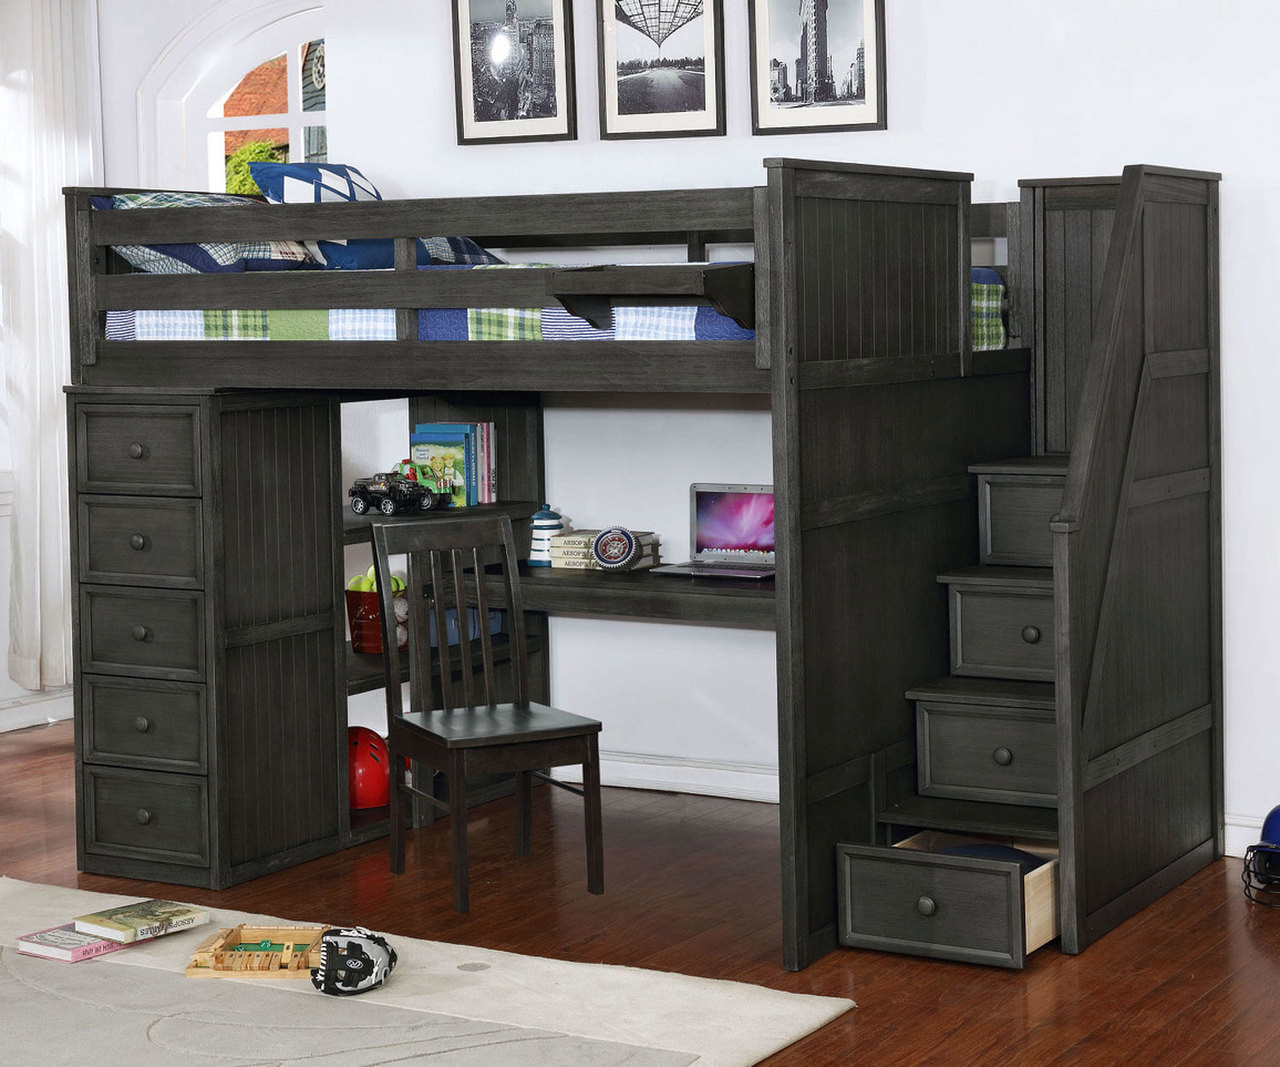 cabin bed with desk